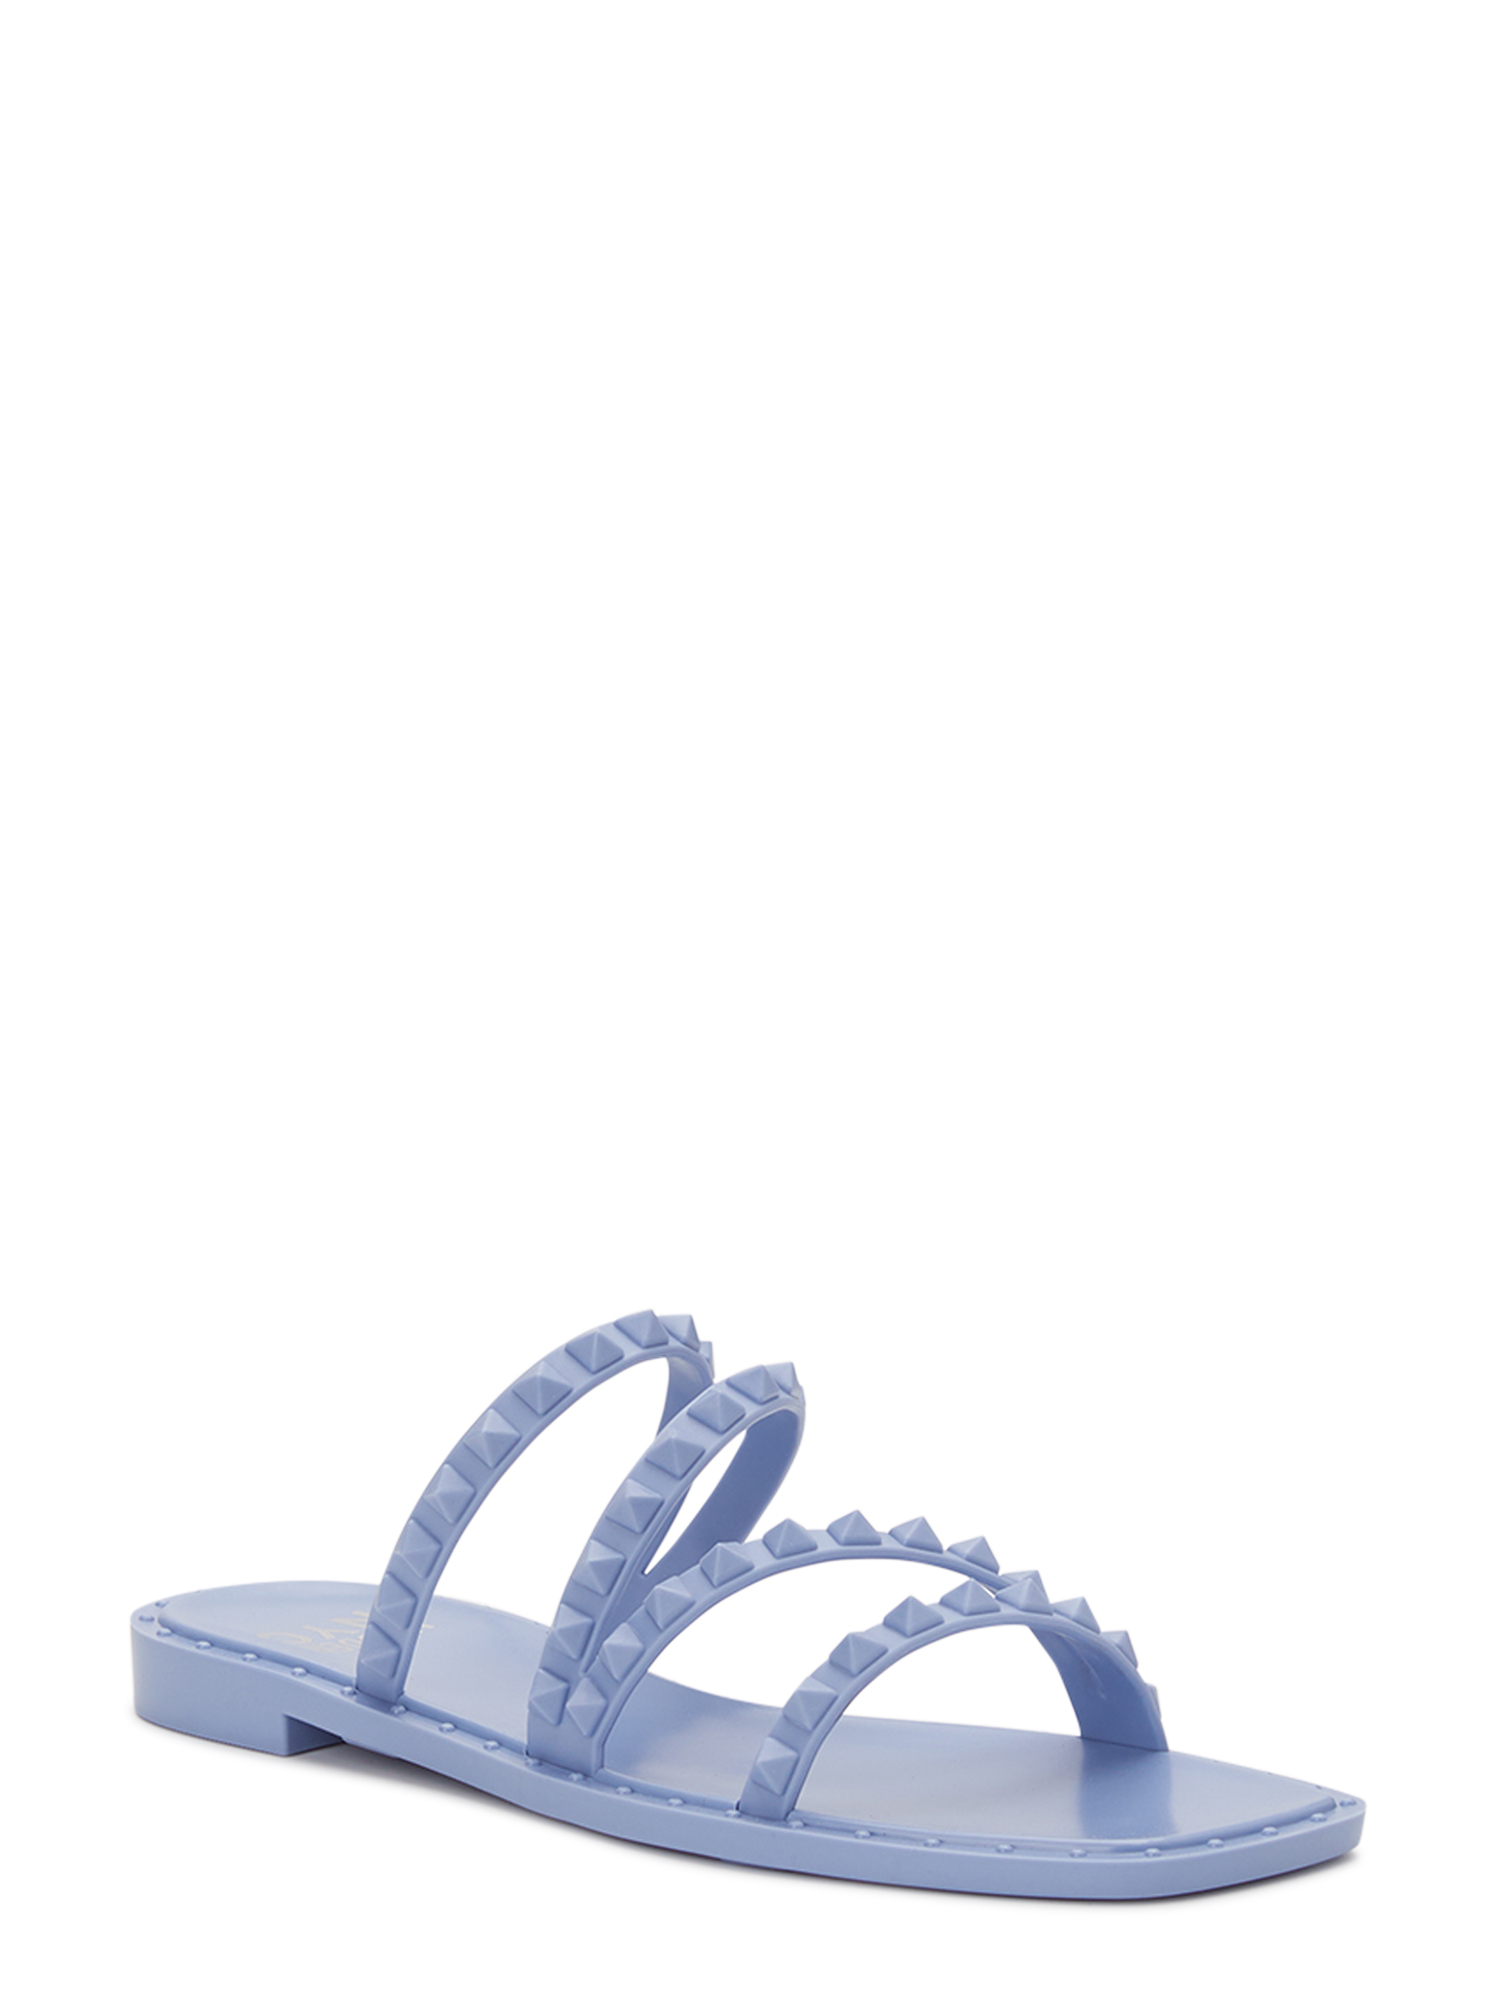 Madden NYC Women's Studded Strappy Jelly Slide Sandals - image 1 of 5